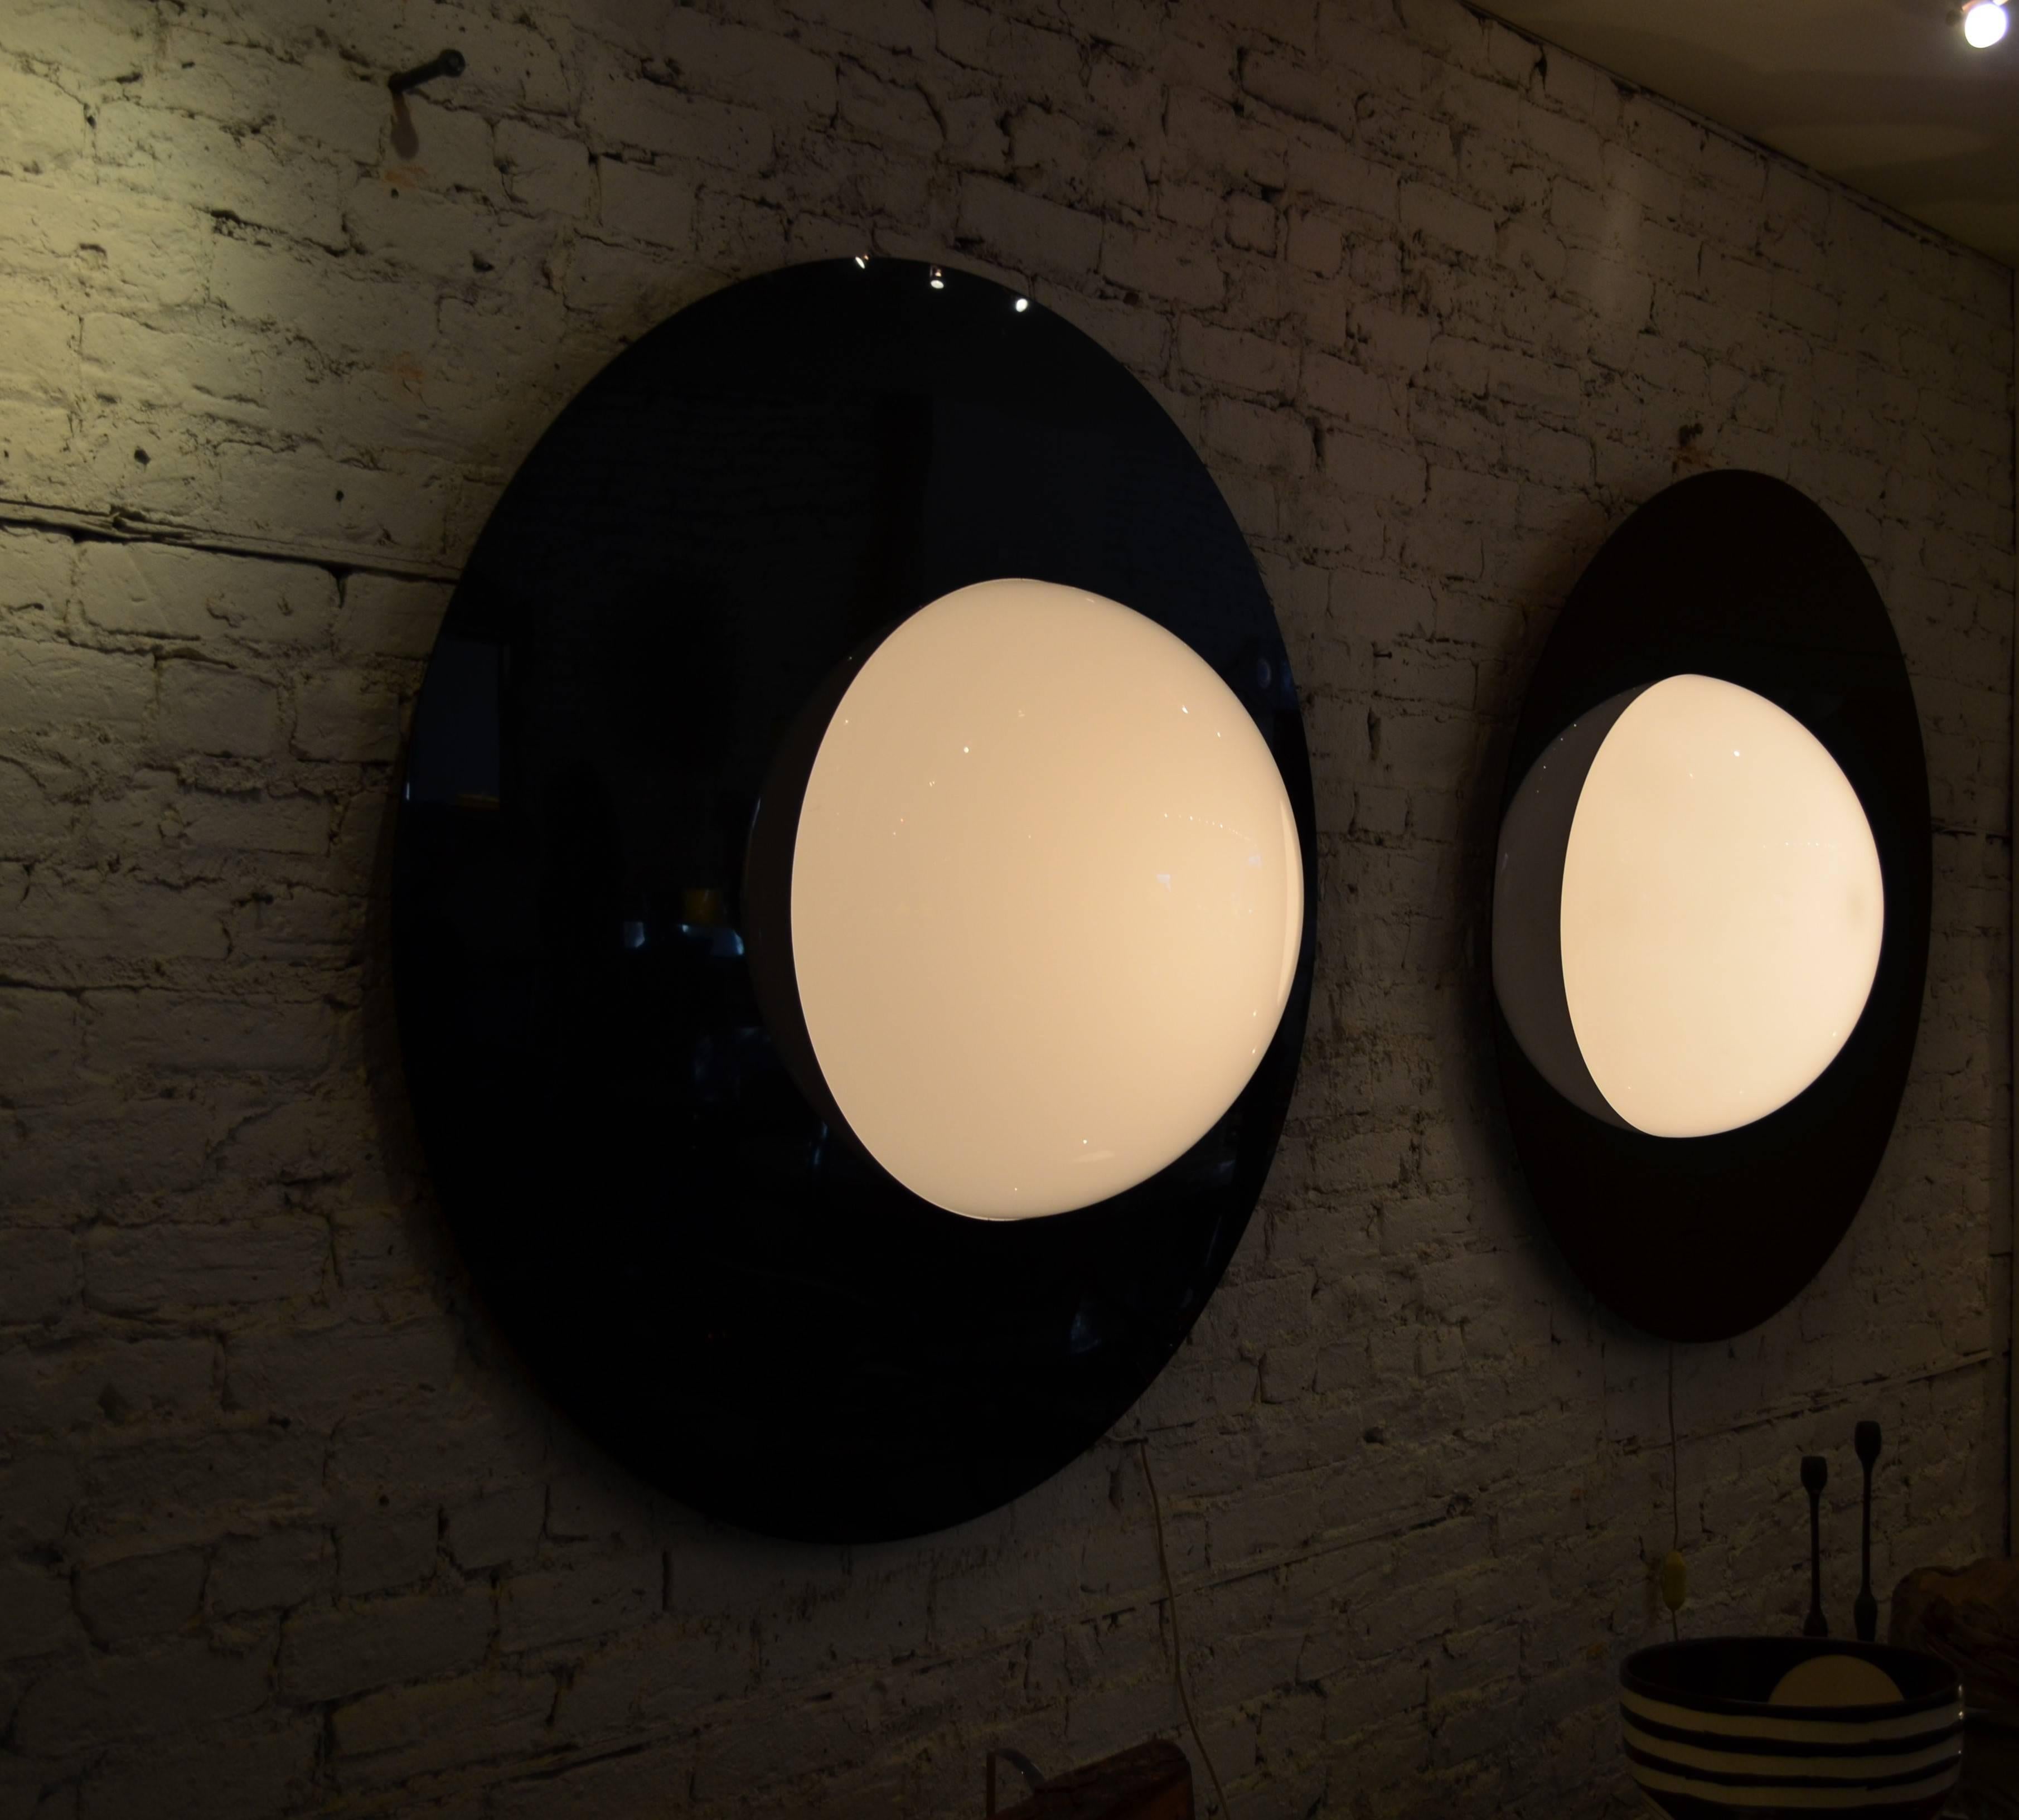 Incredible eye candy on a monumental scale.
A pair of acrylic graphic black and white mod sconces.
Each sconce has a 46 inch black plastic back disk.
An off-centre 20 inch white translucent half globe
projects 10 inches from the wall. The